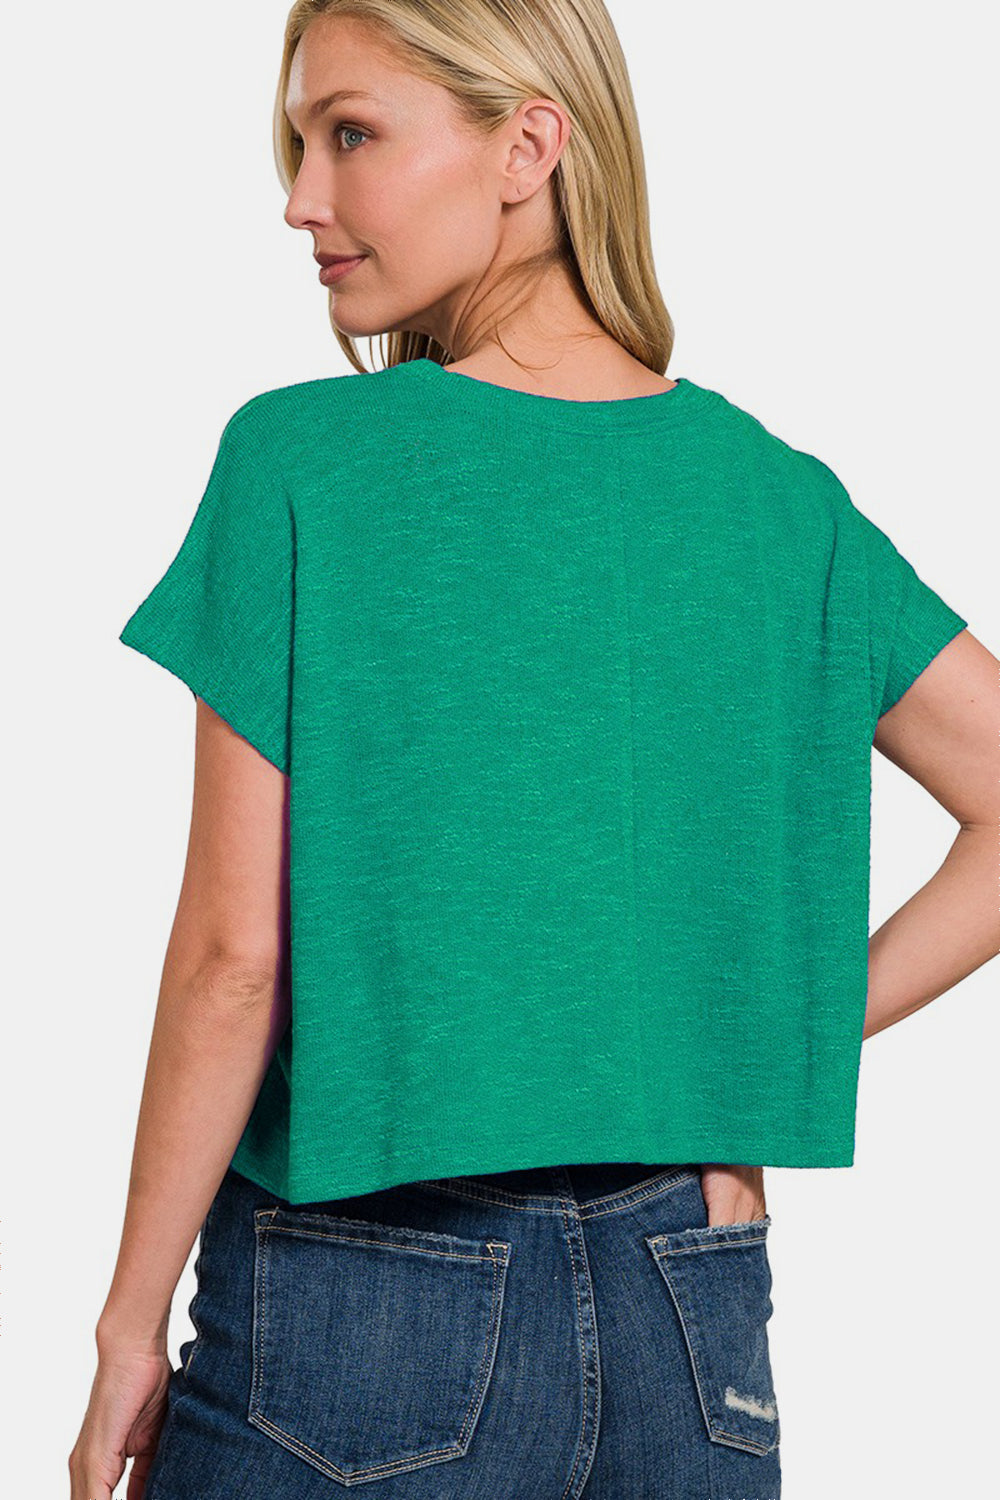 Knit Round Neck Cropped Top